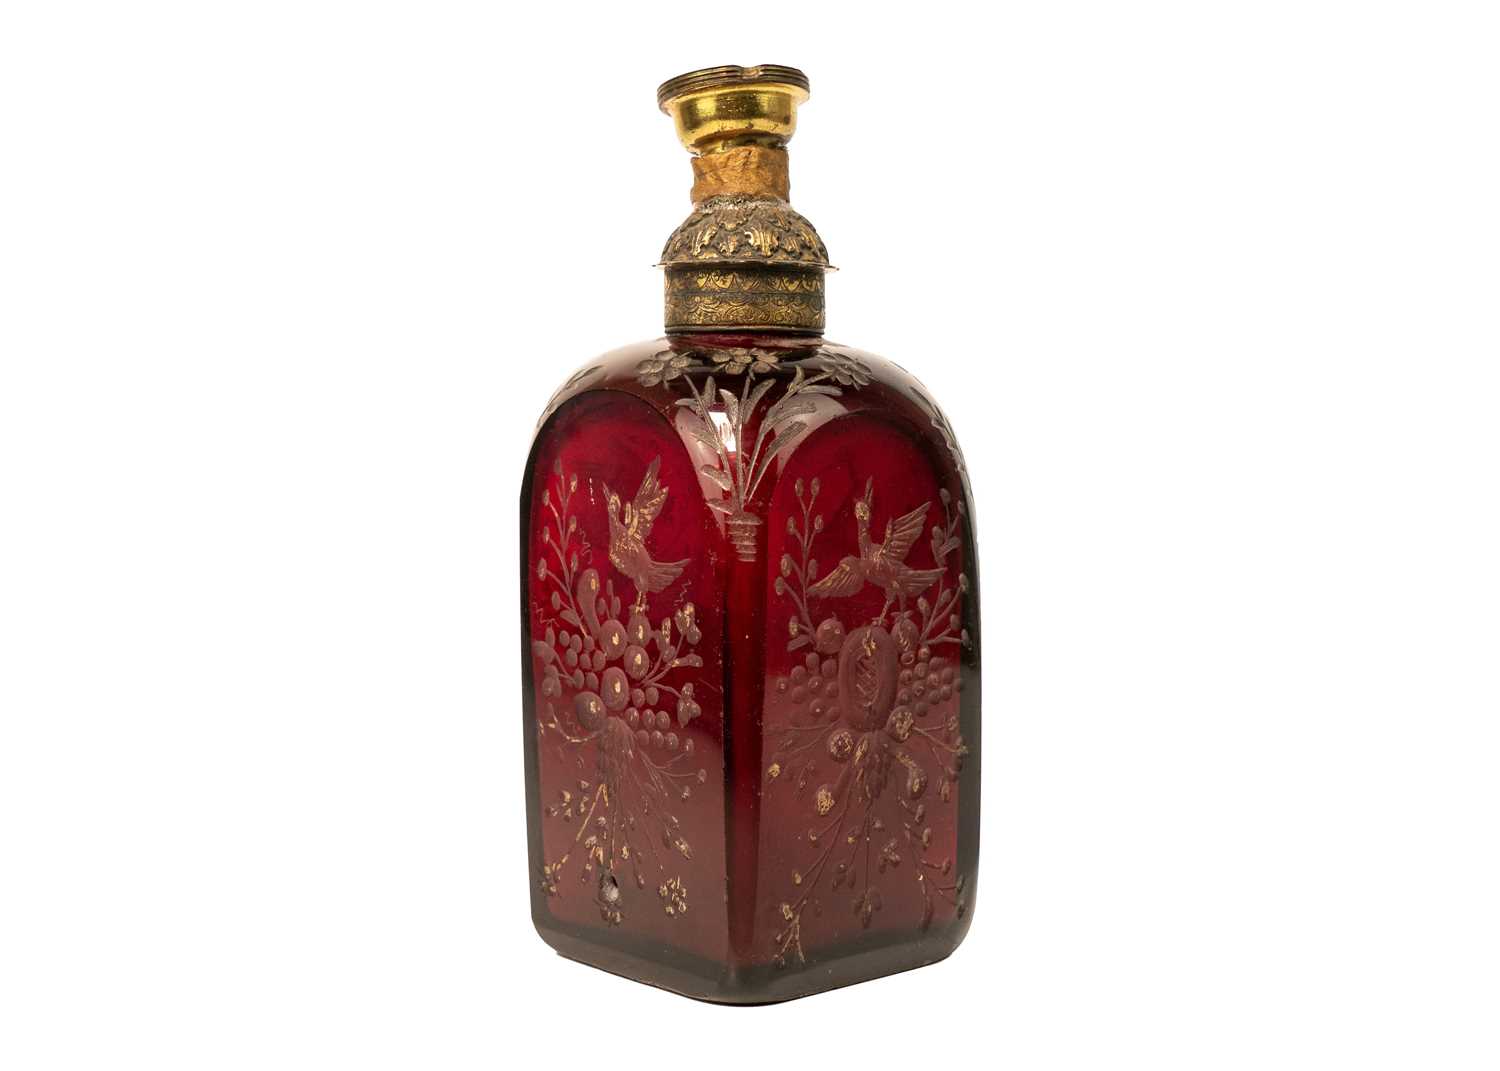 An early 18th century ruby glass decanter, etched with exotic birds, flowers and foliage. - Image 3 of 7